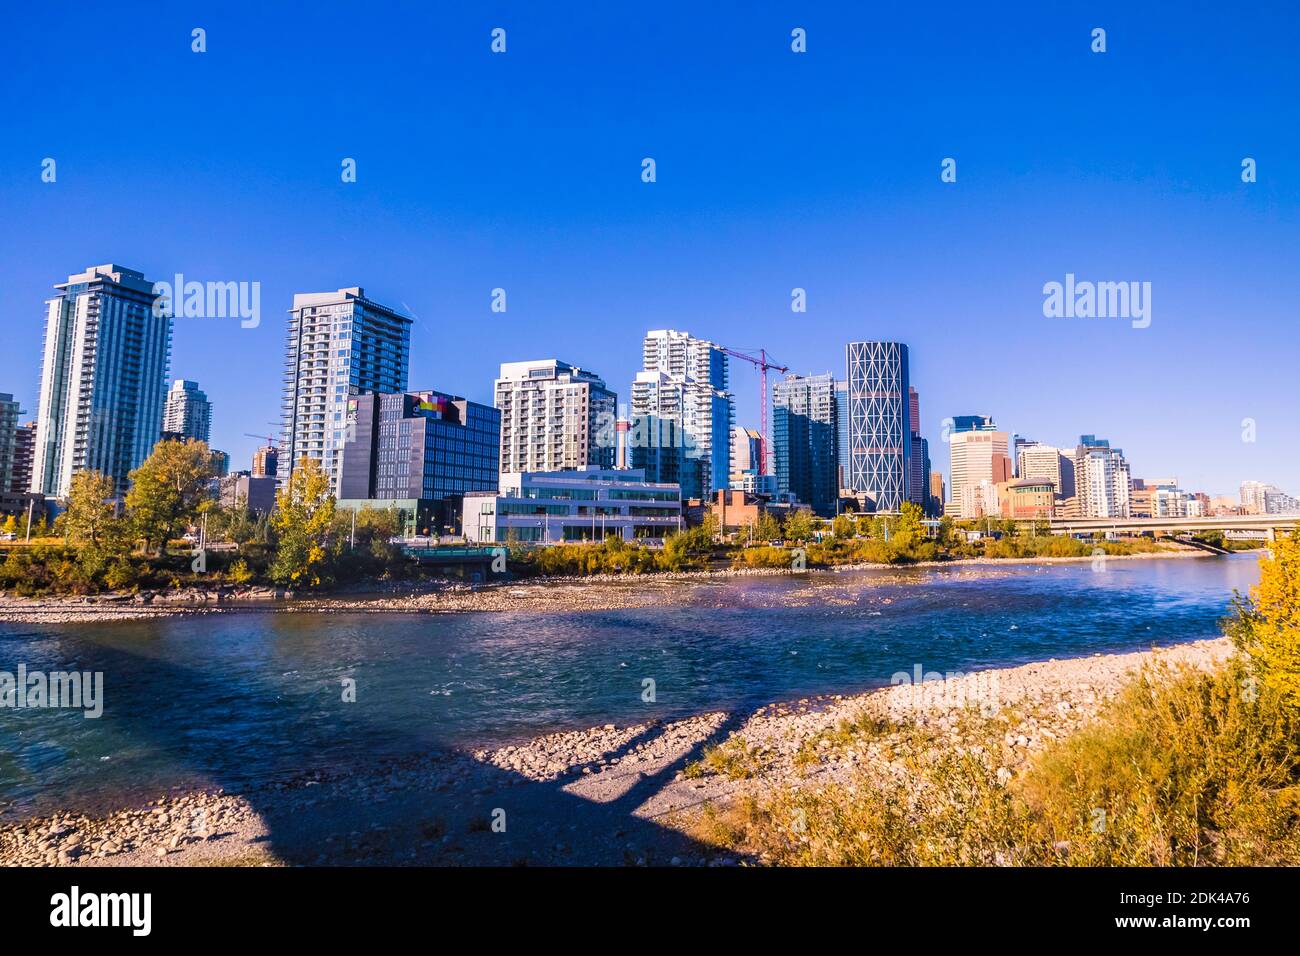 27 September 2020 - Calgary, Alberta Canada Calgry down town business district skyline Stock Photo